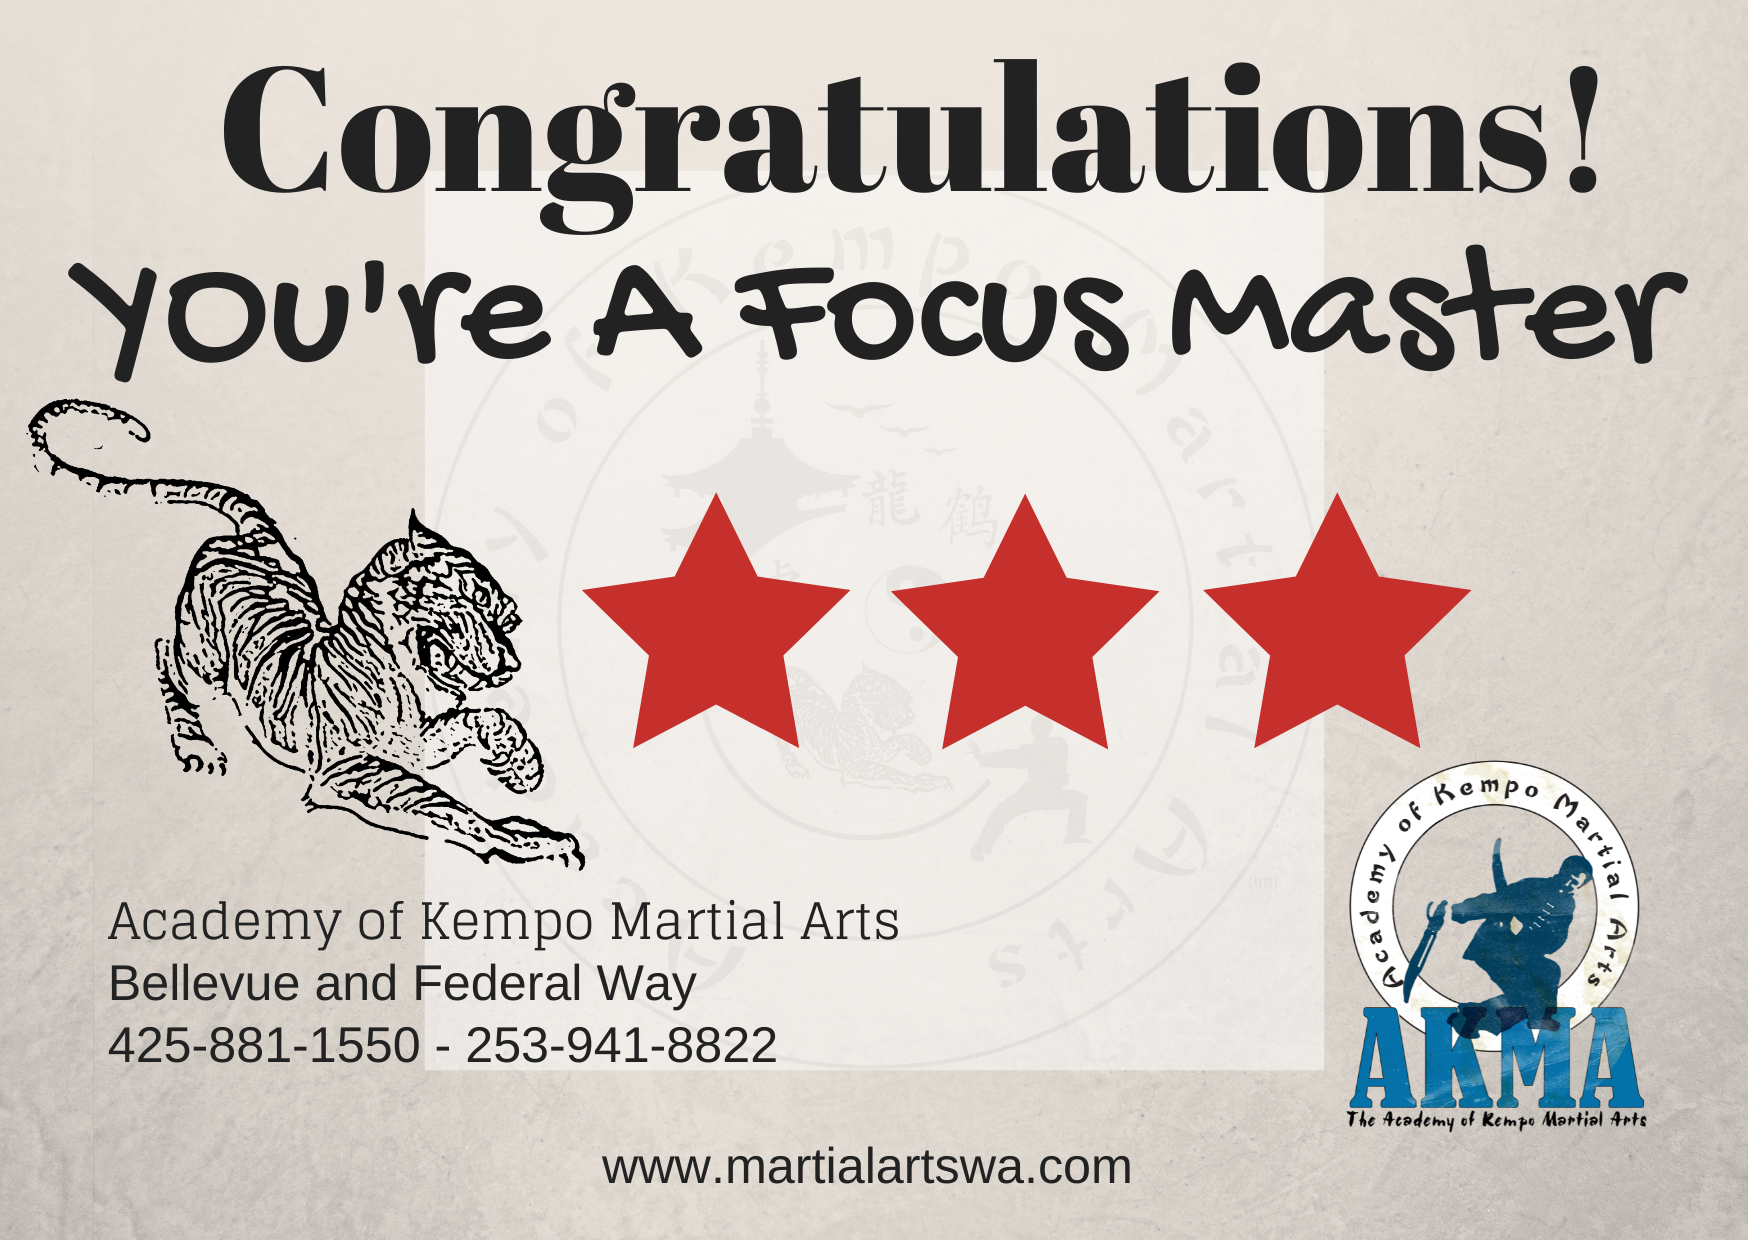 acadmy of kempo martial arts focus master class kids karate for  concentration